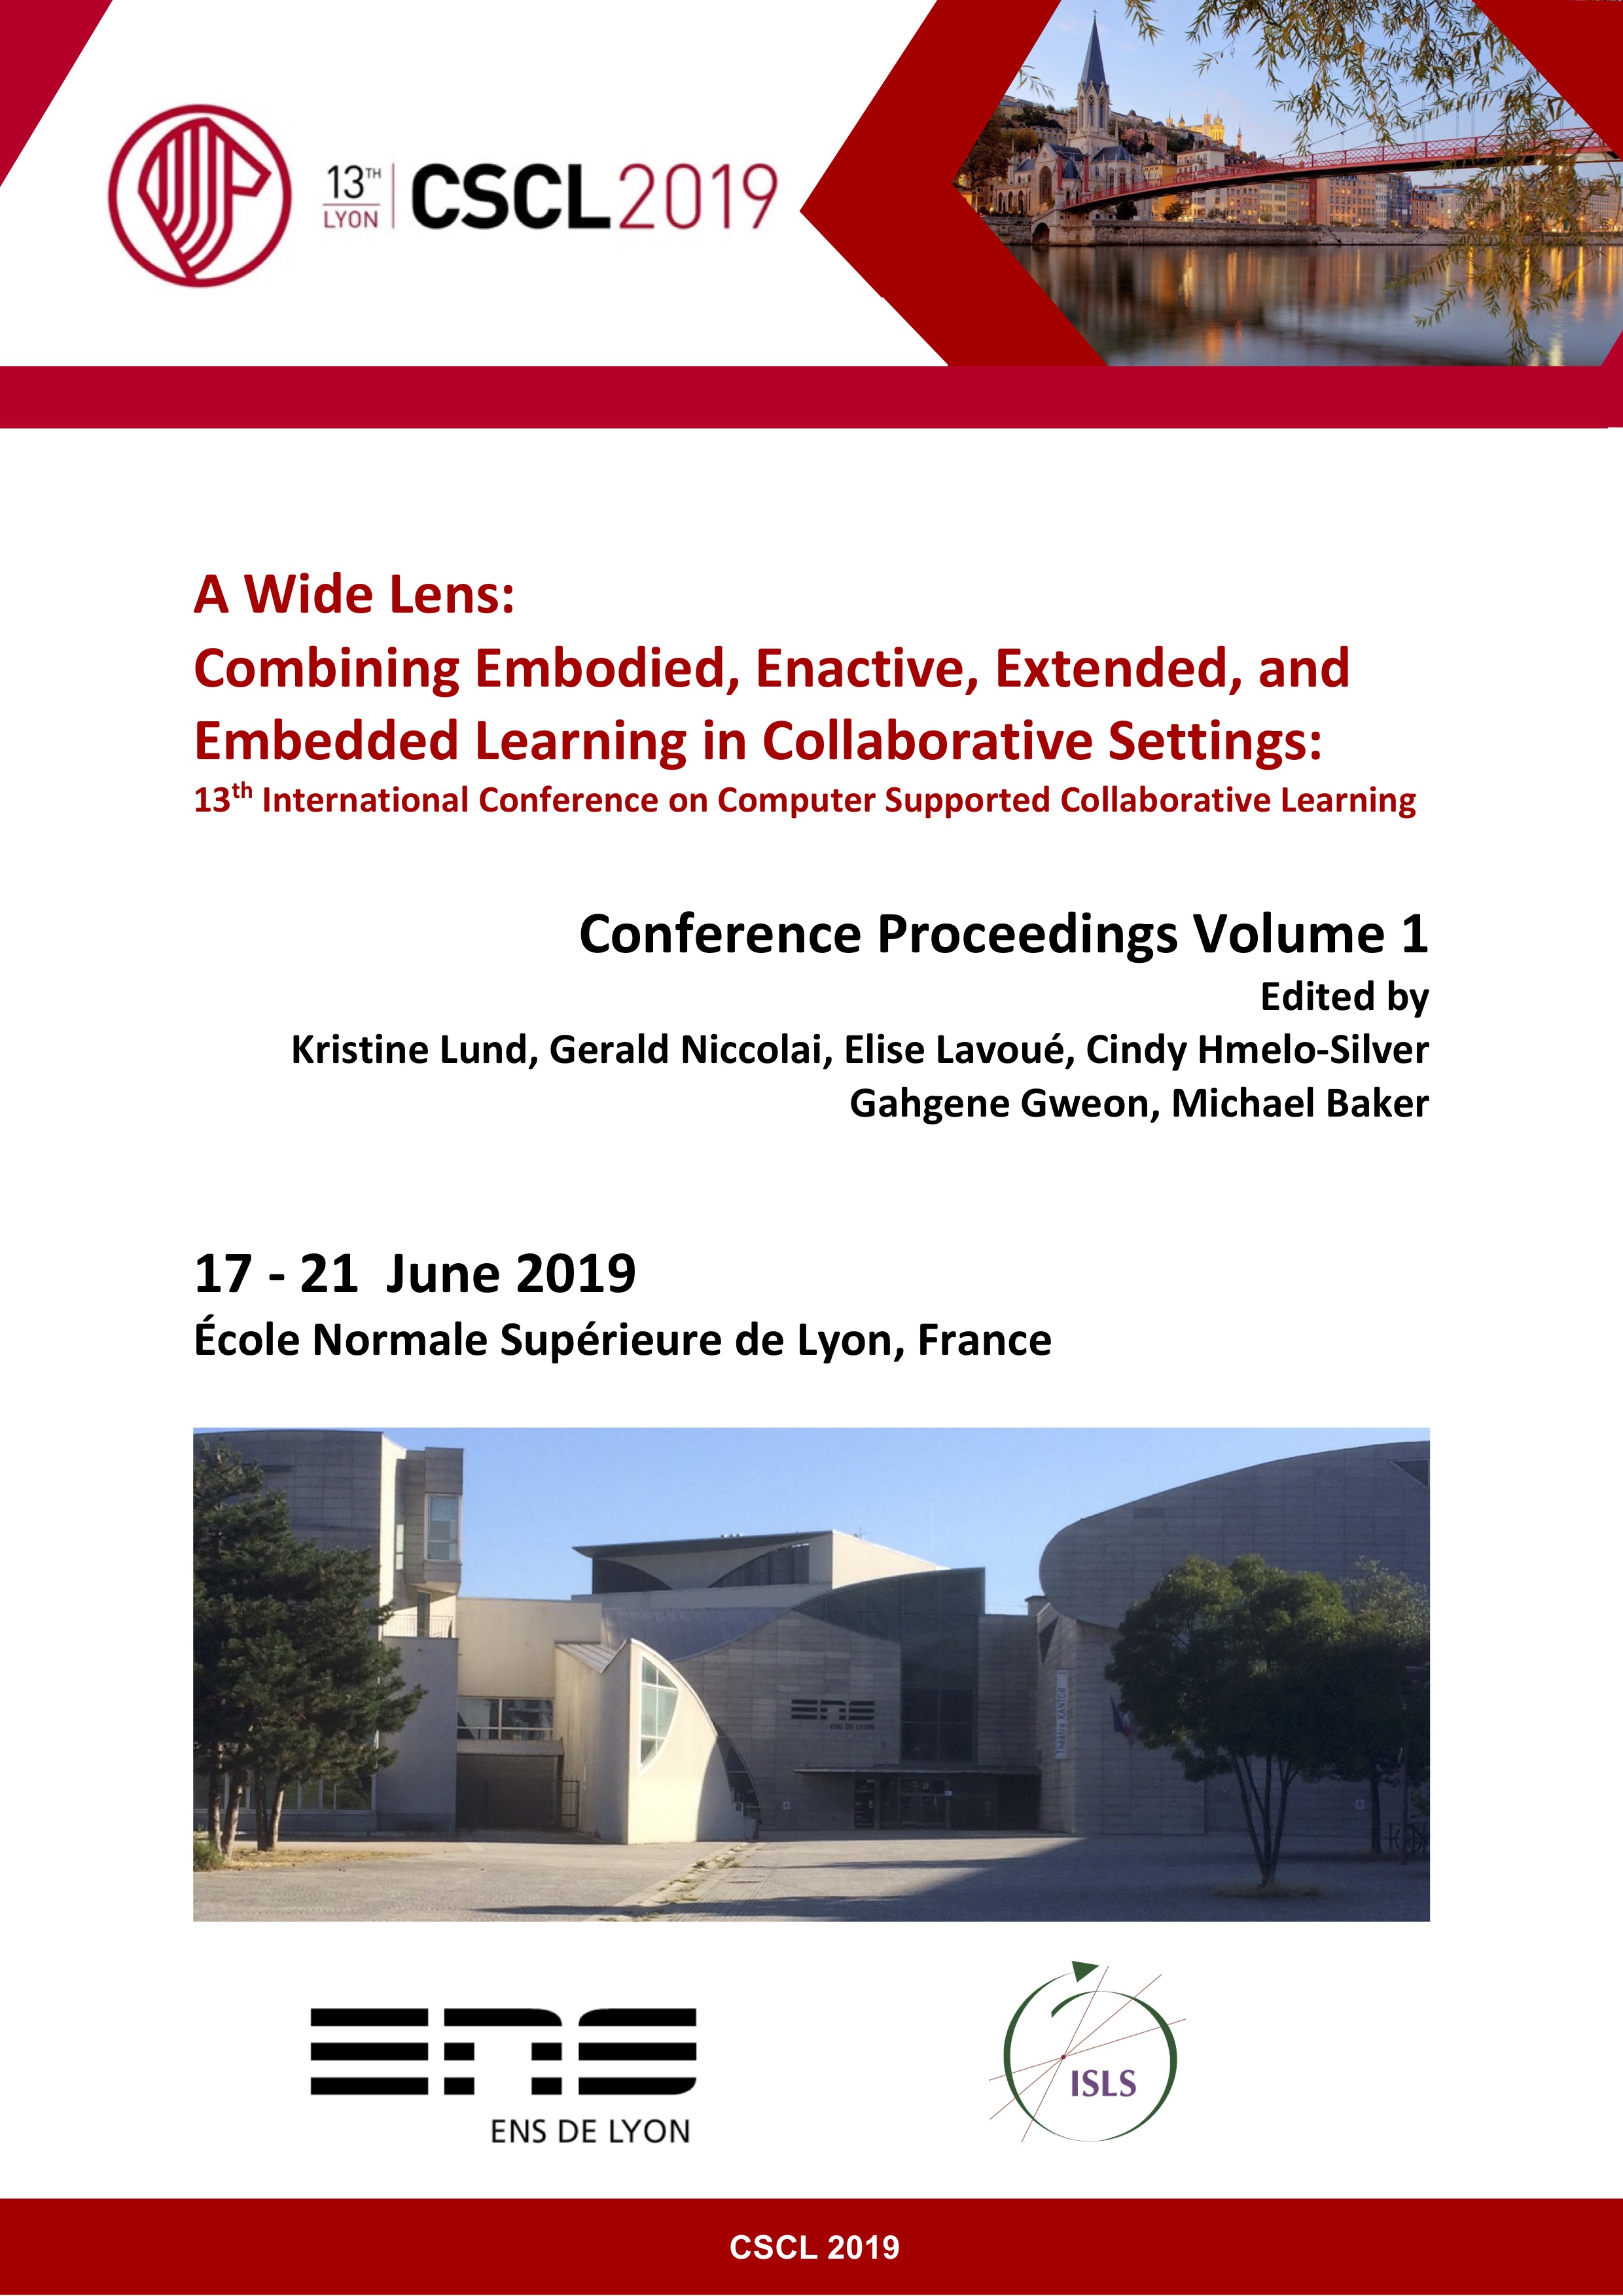 Lund, K., Niccolai, G., Lavoué, E., Hmelo-Silver, C., Gweon, G., and Baker, M. (Eds.). (2019). A Wide Lens: Combining Embodied, Enactive, Extended, and Embedded Learning in Collaborative Settings, 13th International Conference on Computer Supported Collaborative Learning (CSCL) 2019, Volume 1. Lyon, France: International Society of the Learning Sciences.